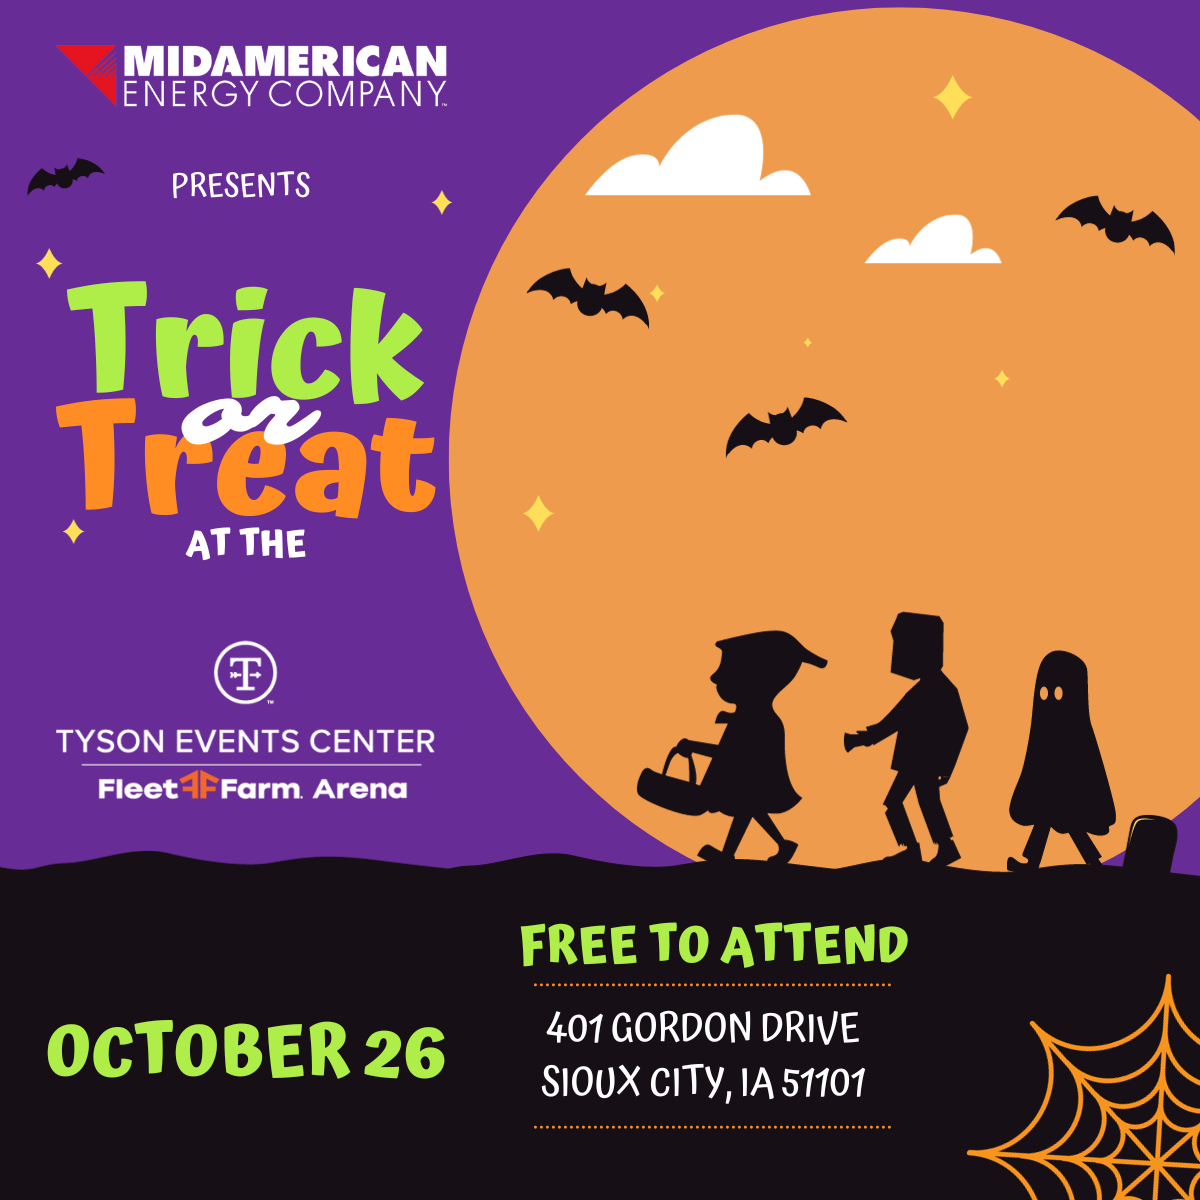 Trick or treat returning to Sioux City's Tyson Events Center